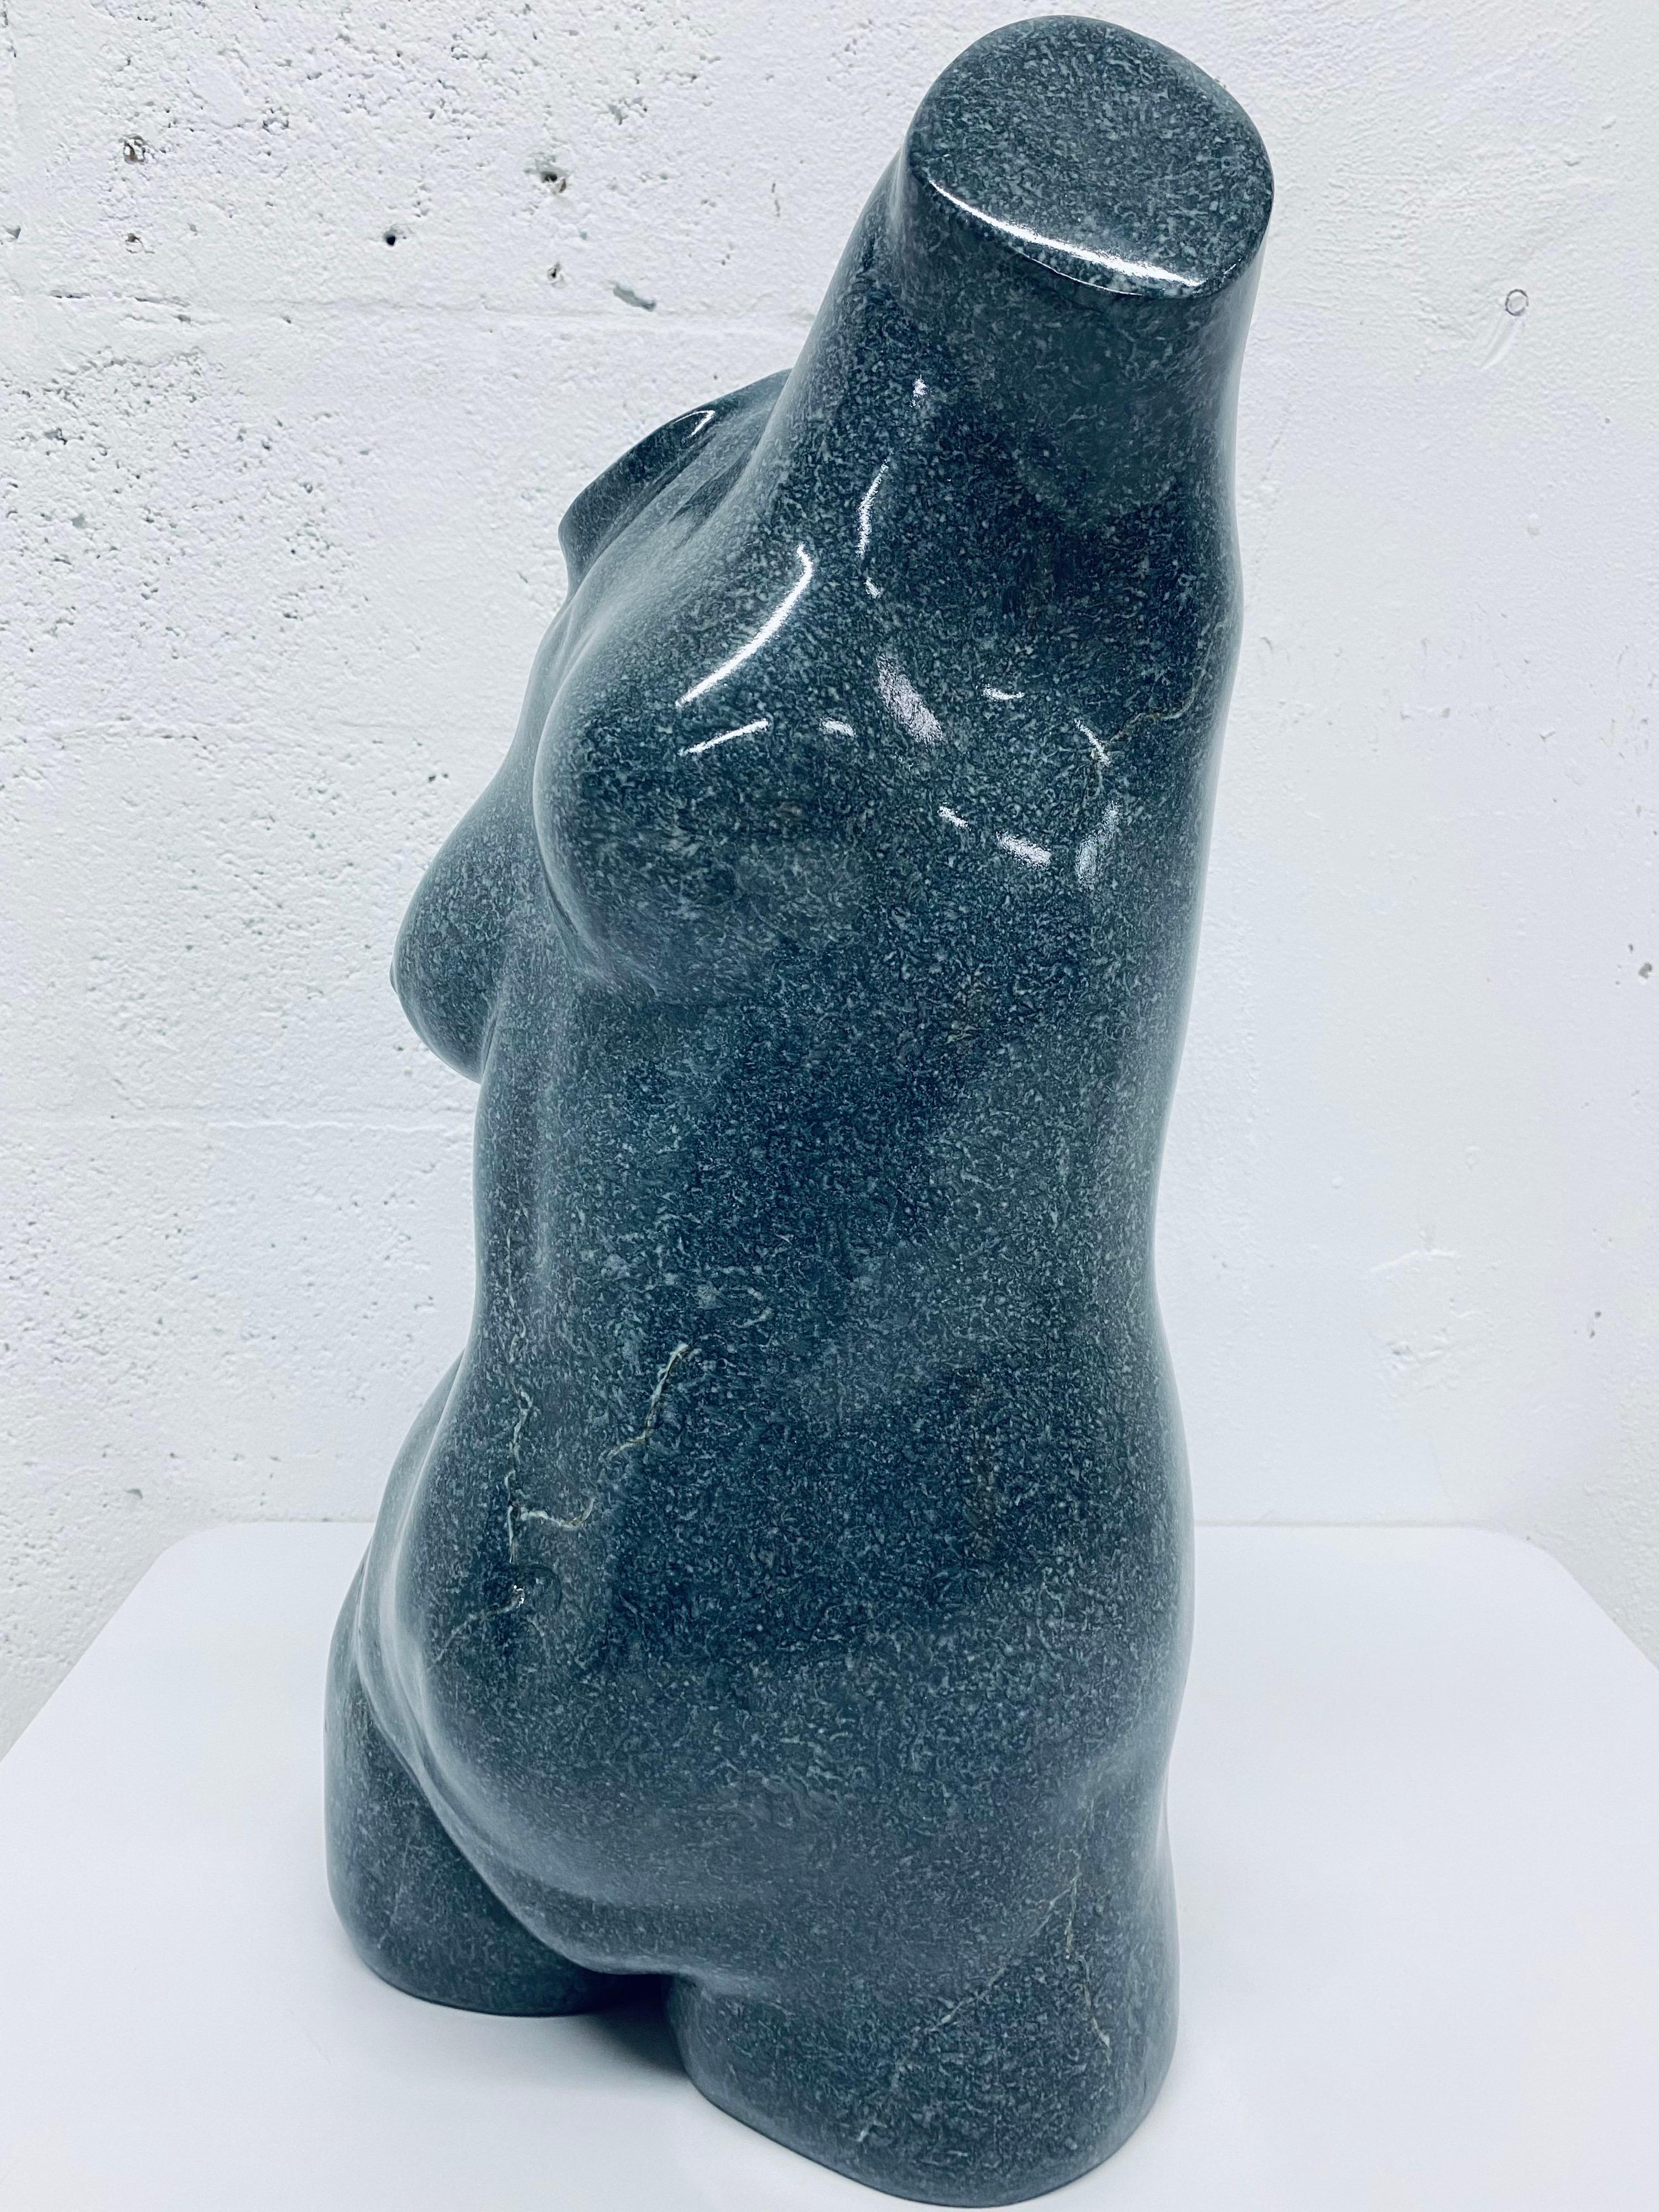 Fiberglass Postmodern Female Resin Bust with Gray Speckled Lacquer Finish, 1980s